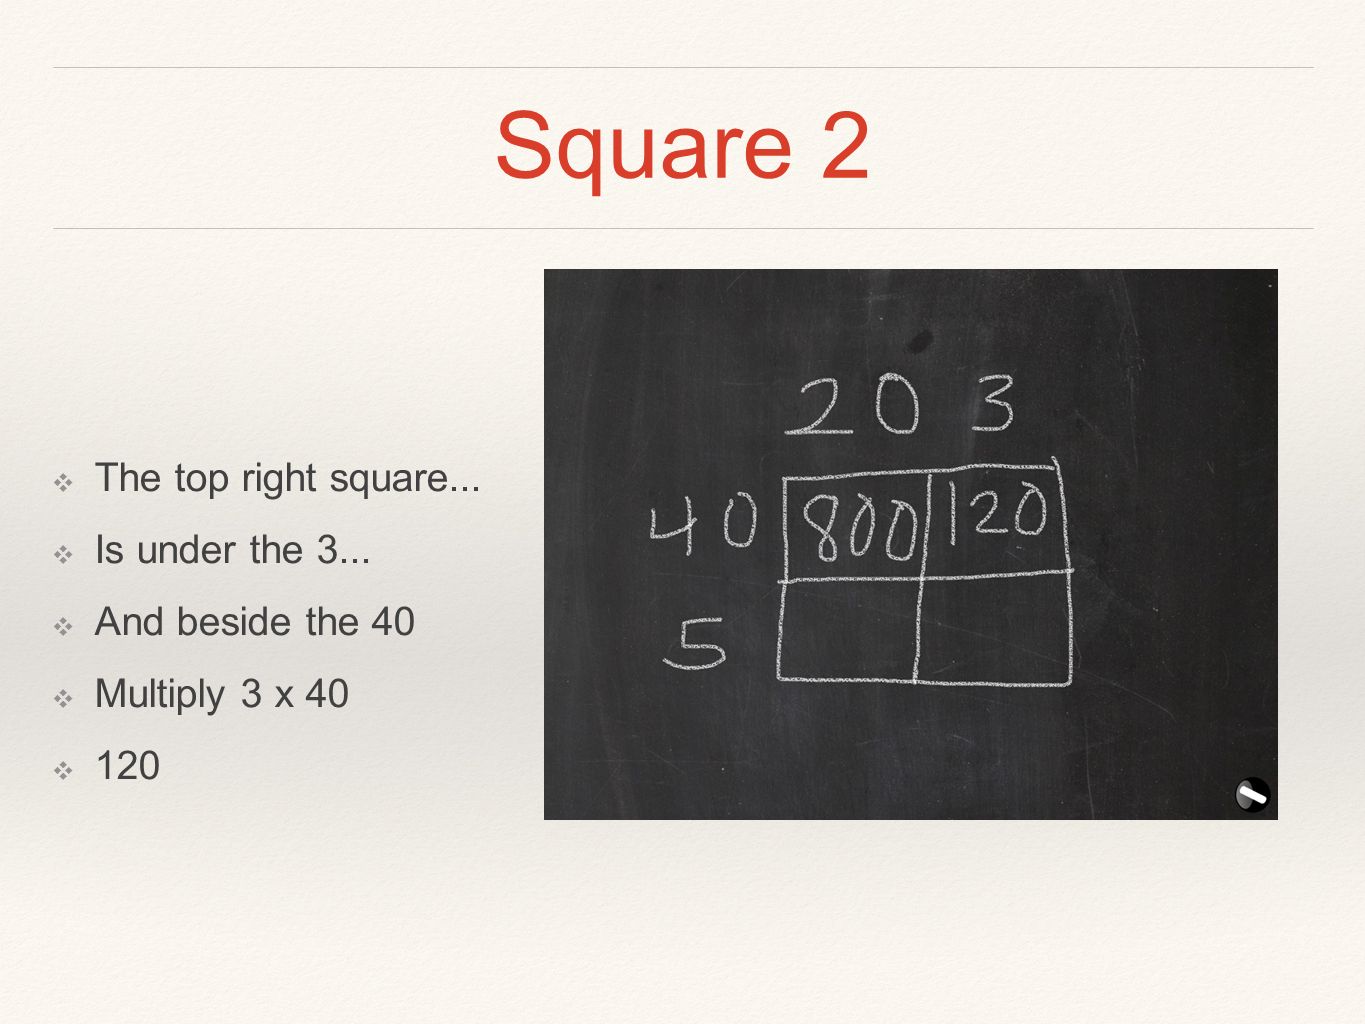 Square 2 ❖ The top right square... ❖ Is under the 3... ❖ And beside the 40 ❖ Multiply 3 x 40 ❖ 120